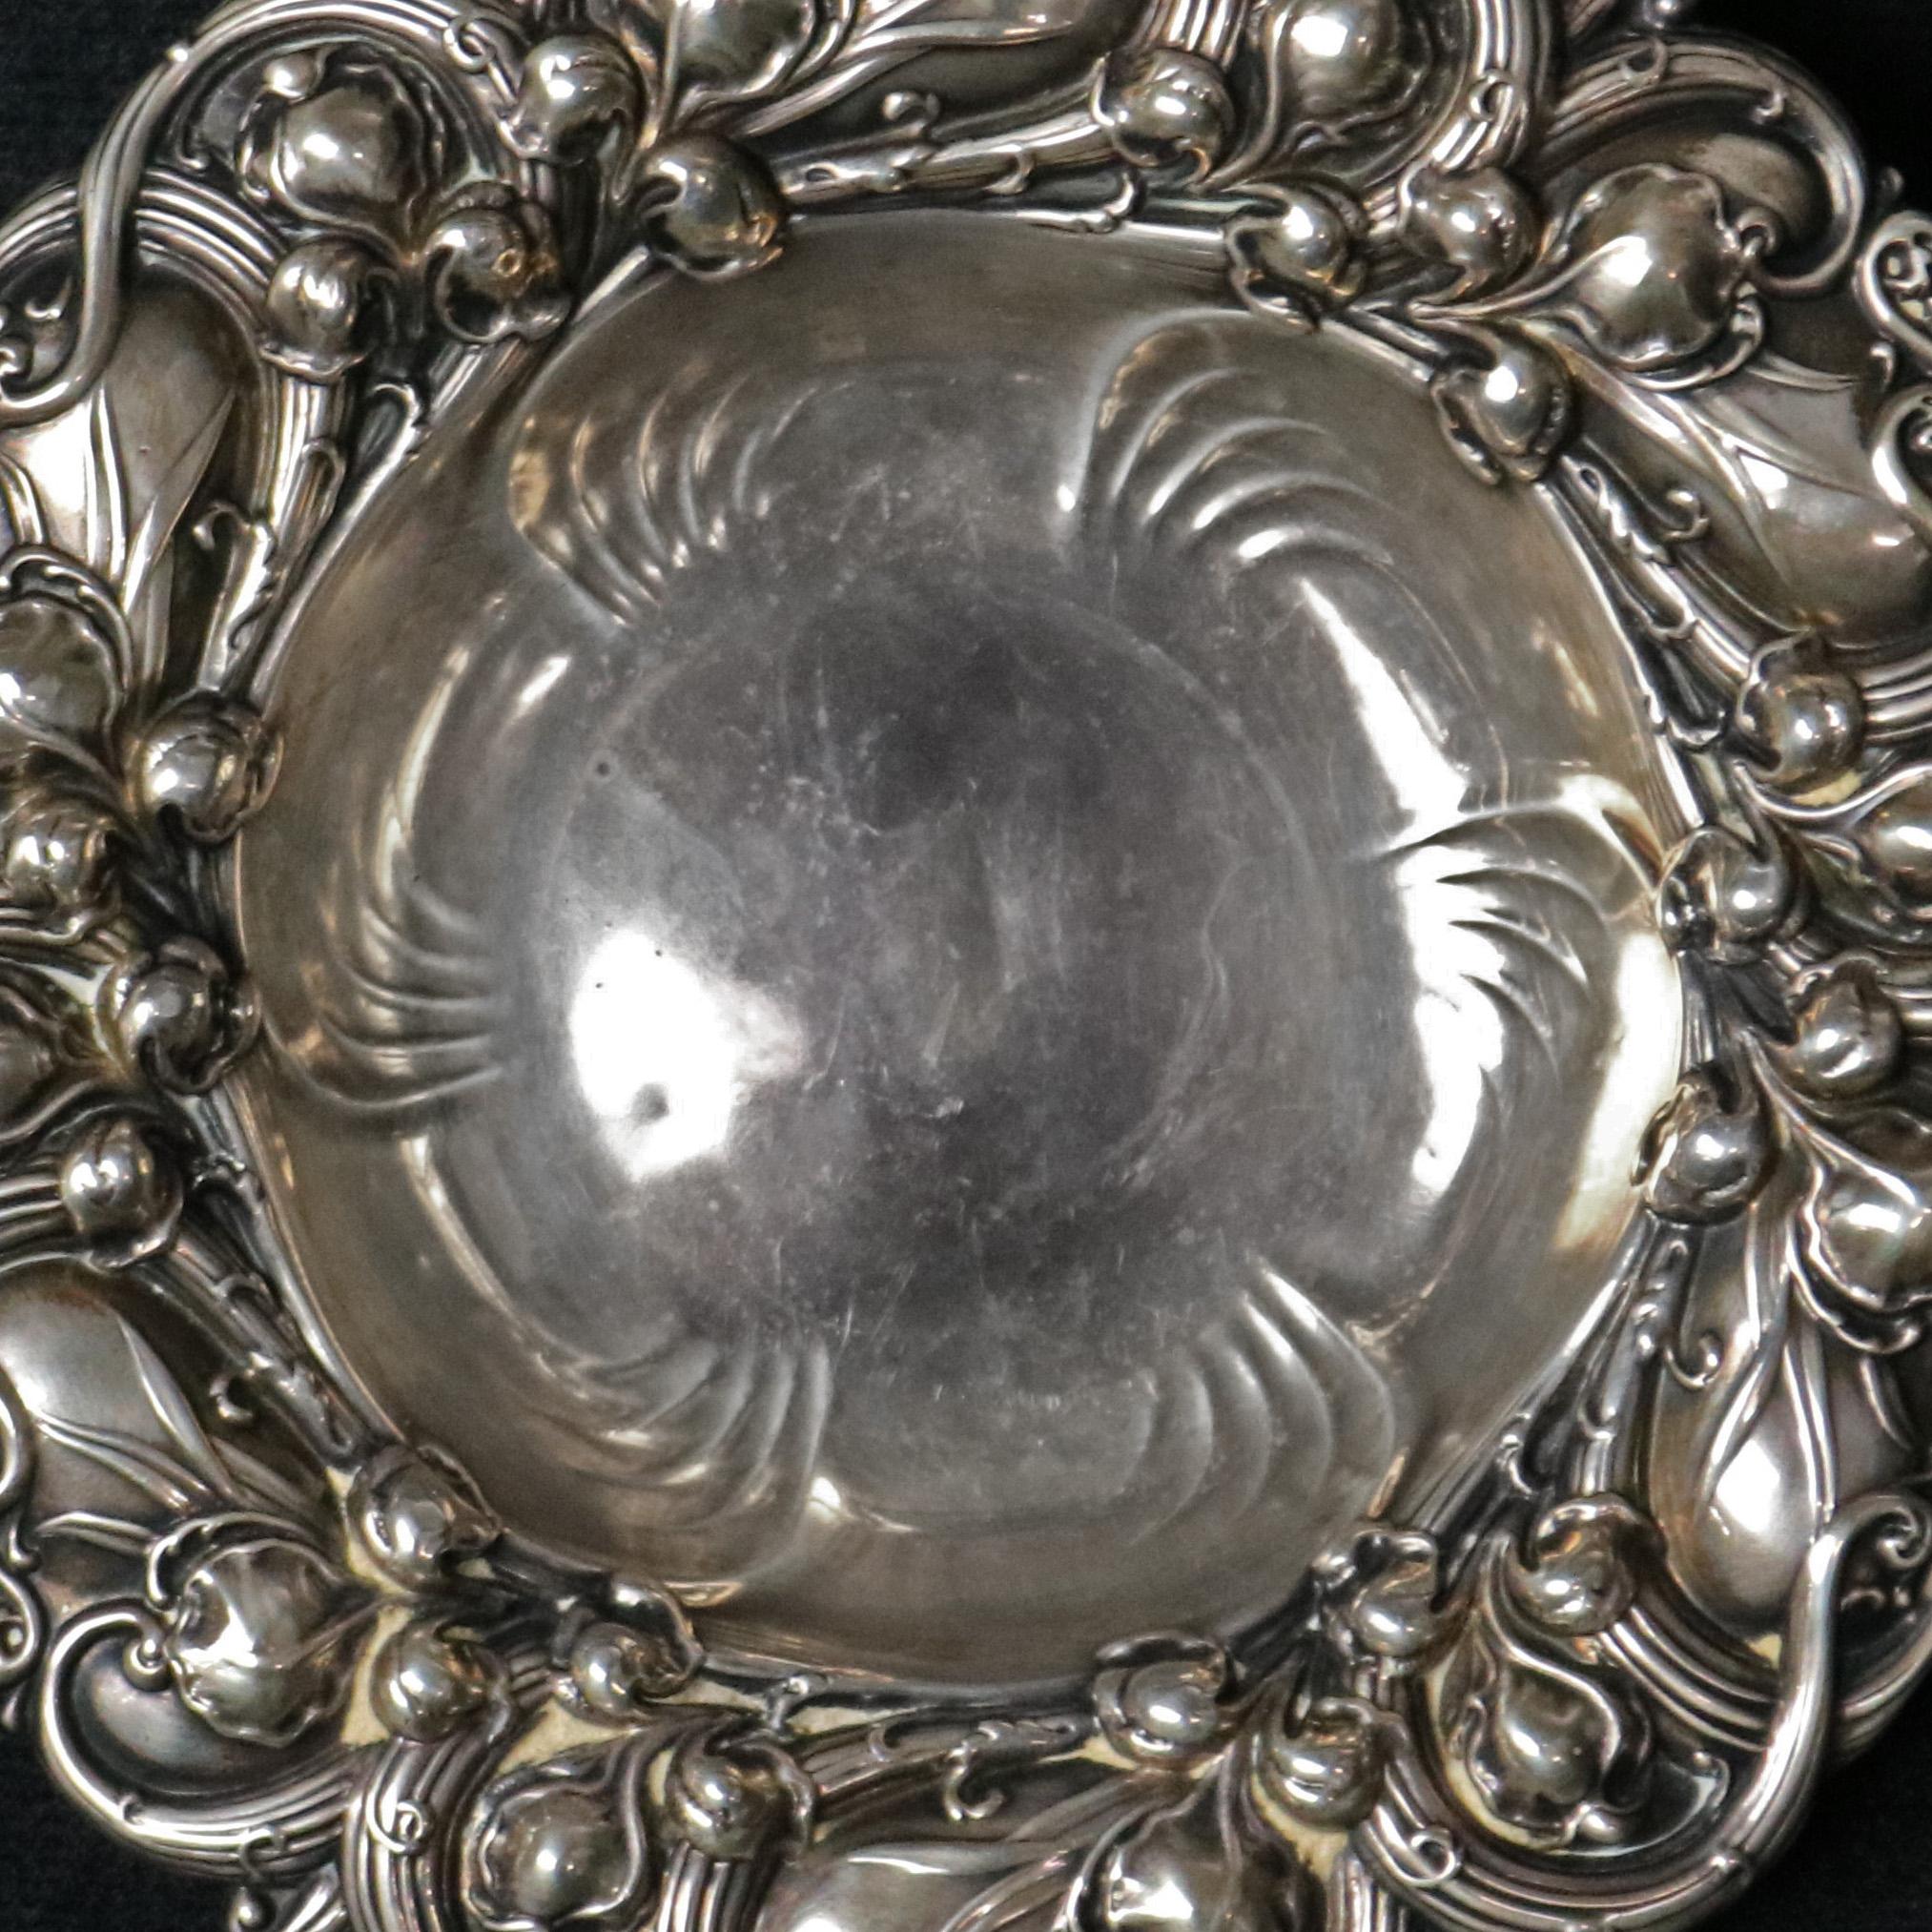 An antique sterling silver nut bowl by Gorham offers repousse leaf and vine rim, en verso mark, circa 1890

Measures: 1